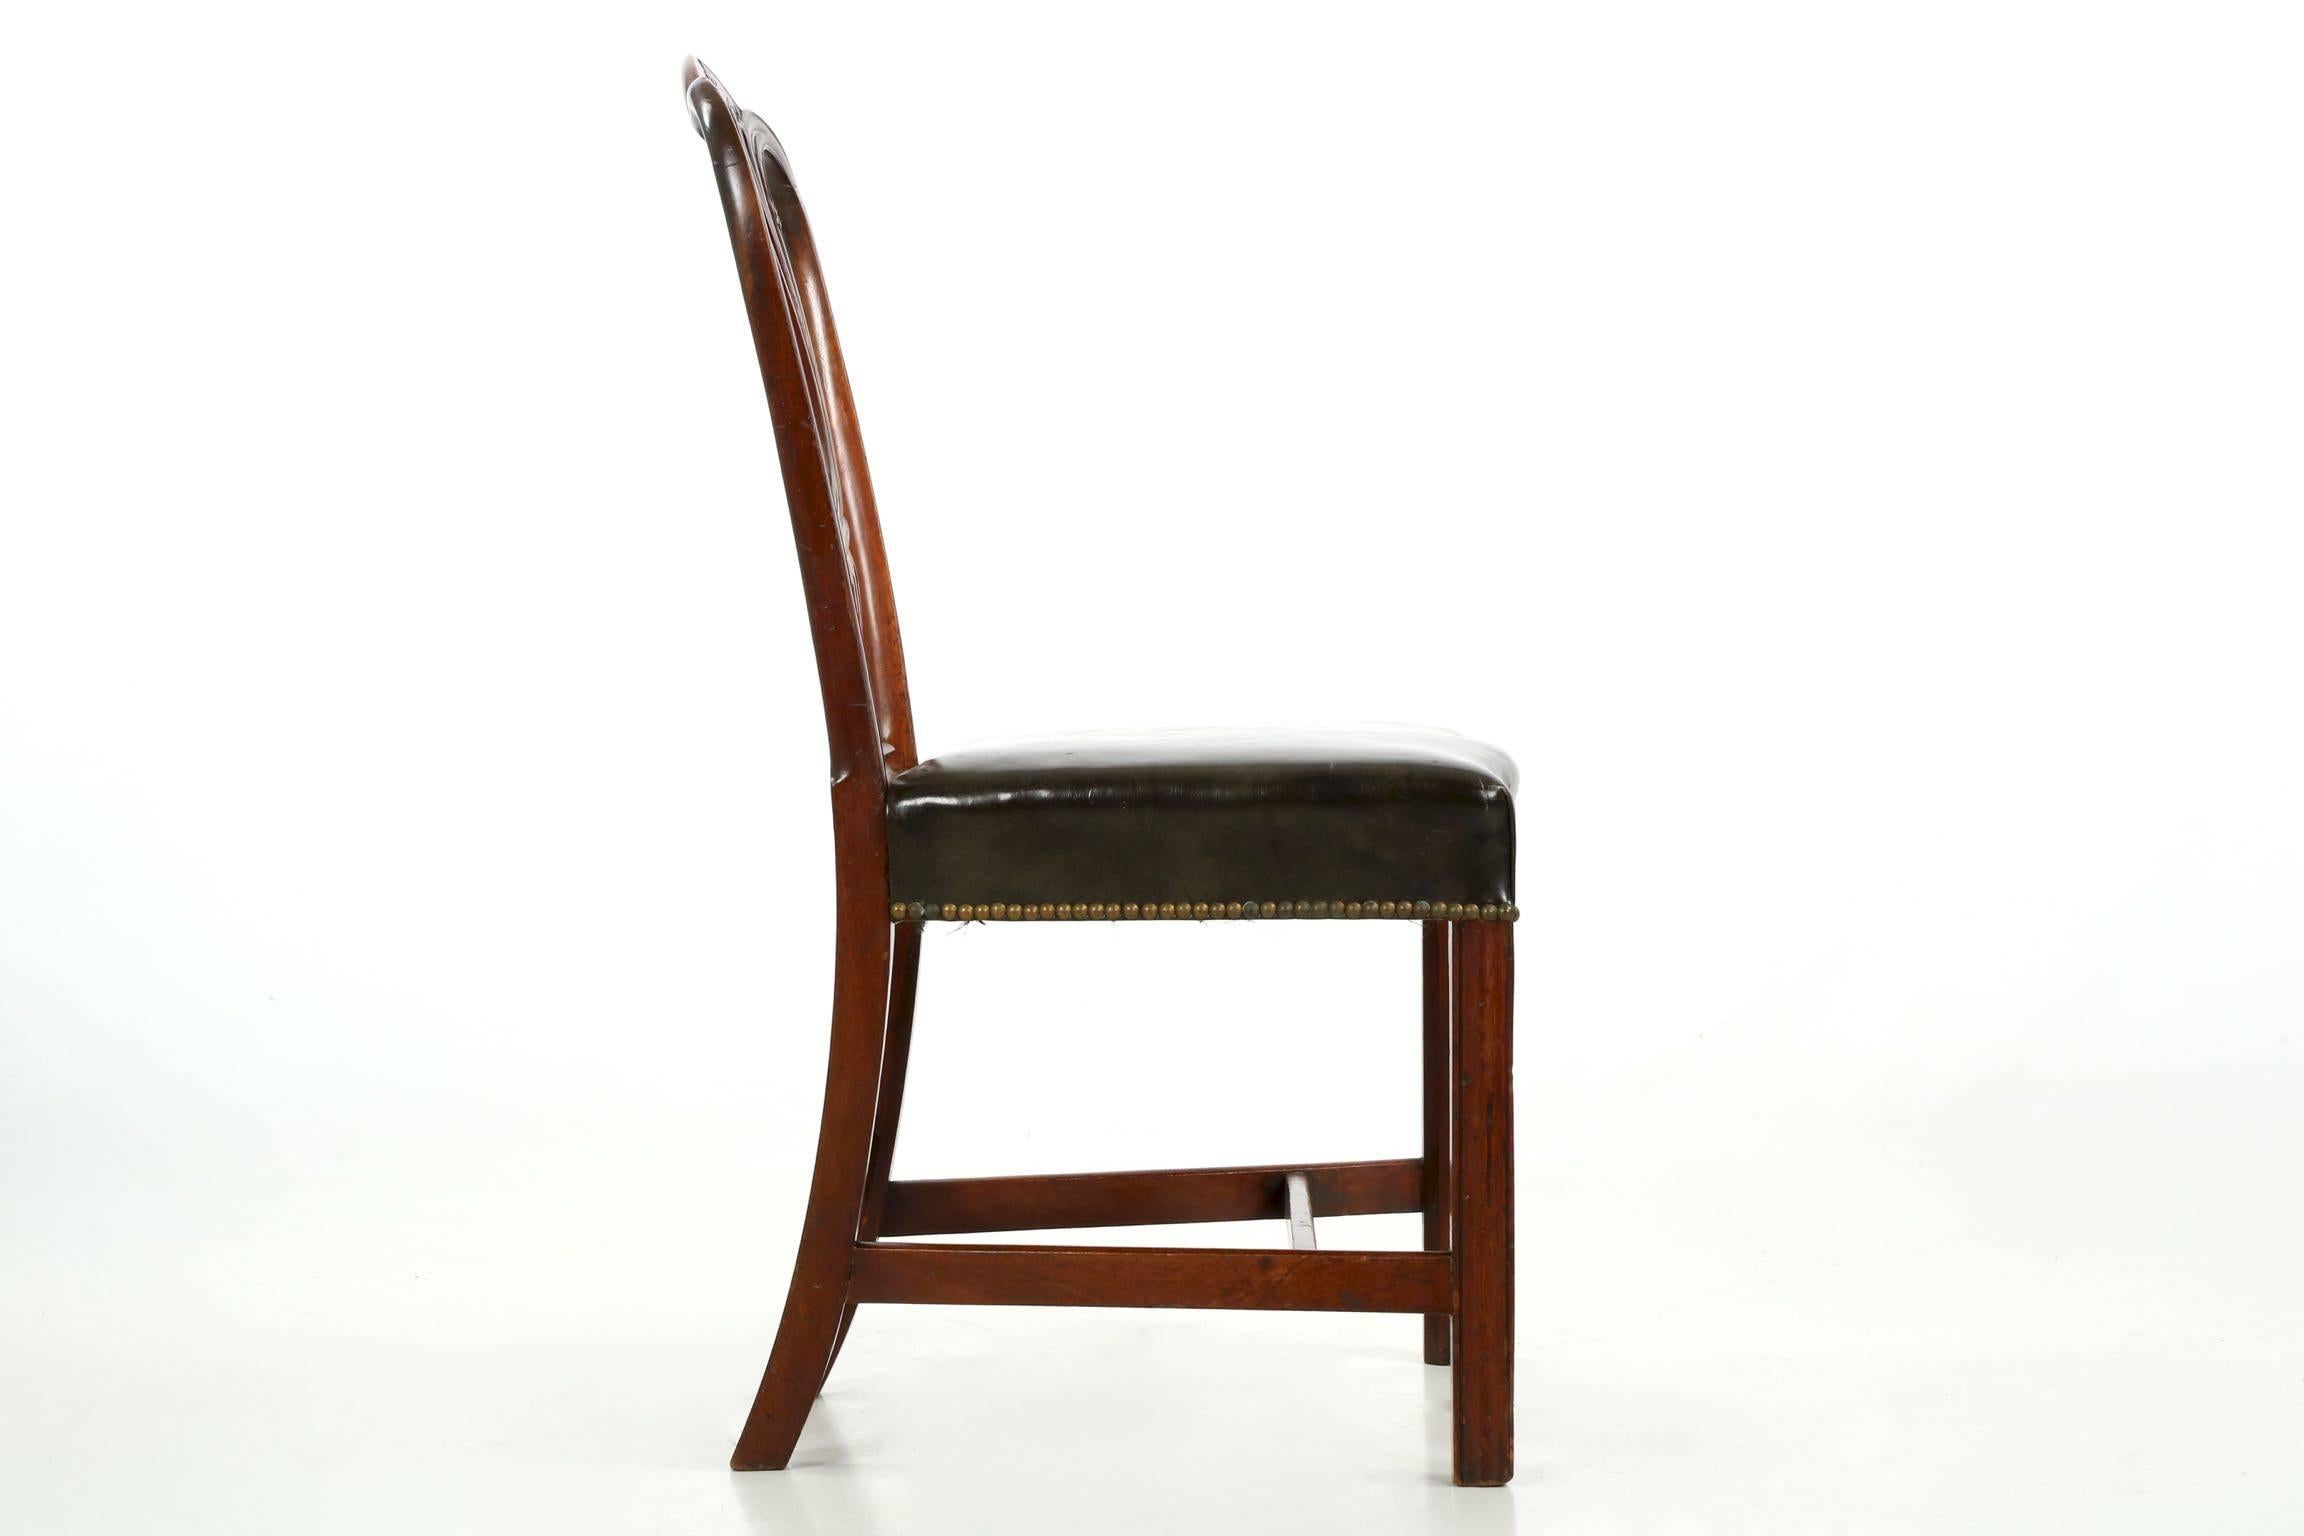 British English Georgian Carved Mahogany Leather Antique Side Chair, Late 18th Century